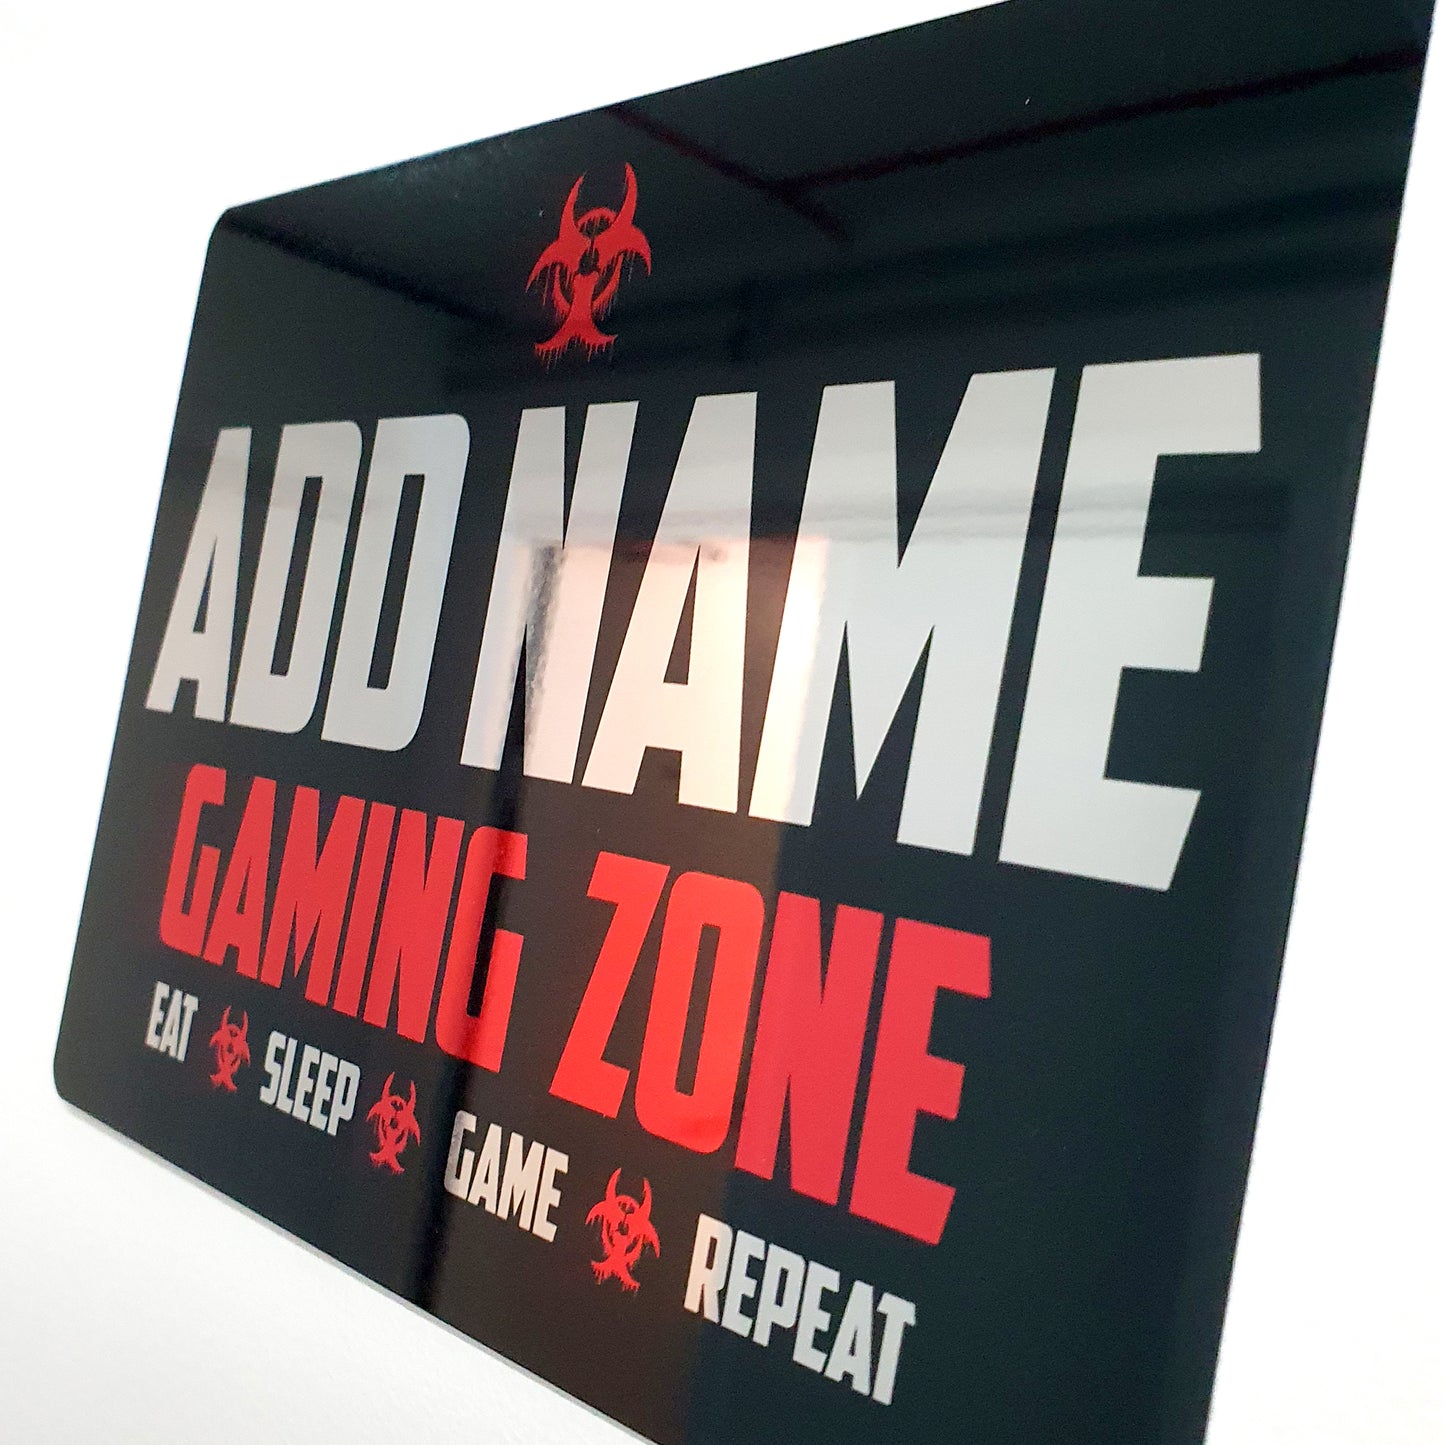 Personalised Metal Mirror Red Gamer Sign - Gaming Zone Caution